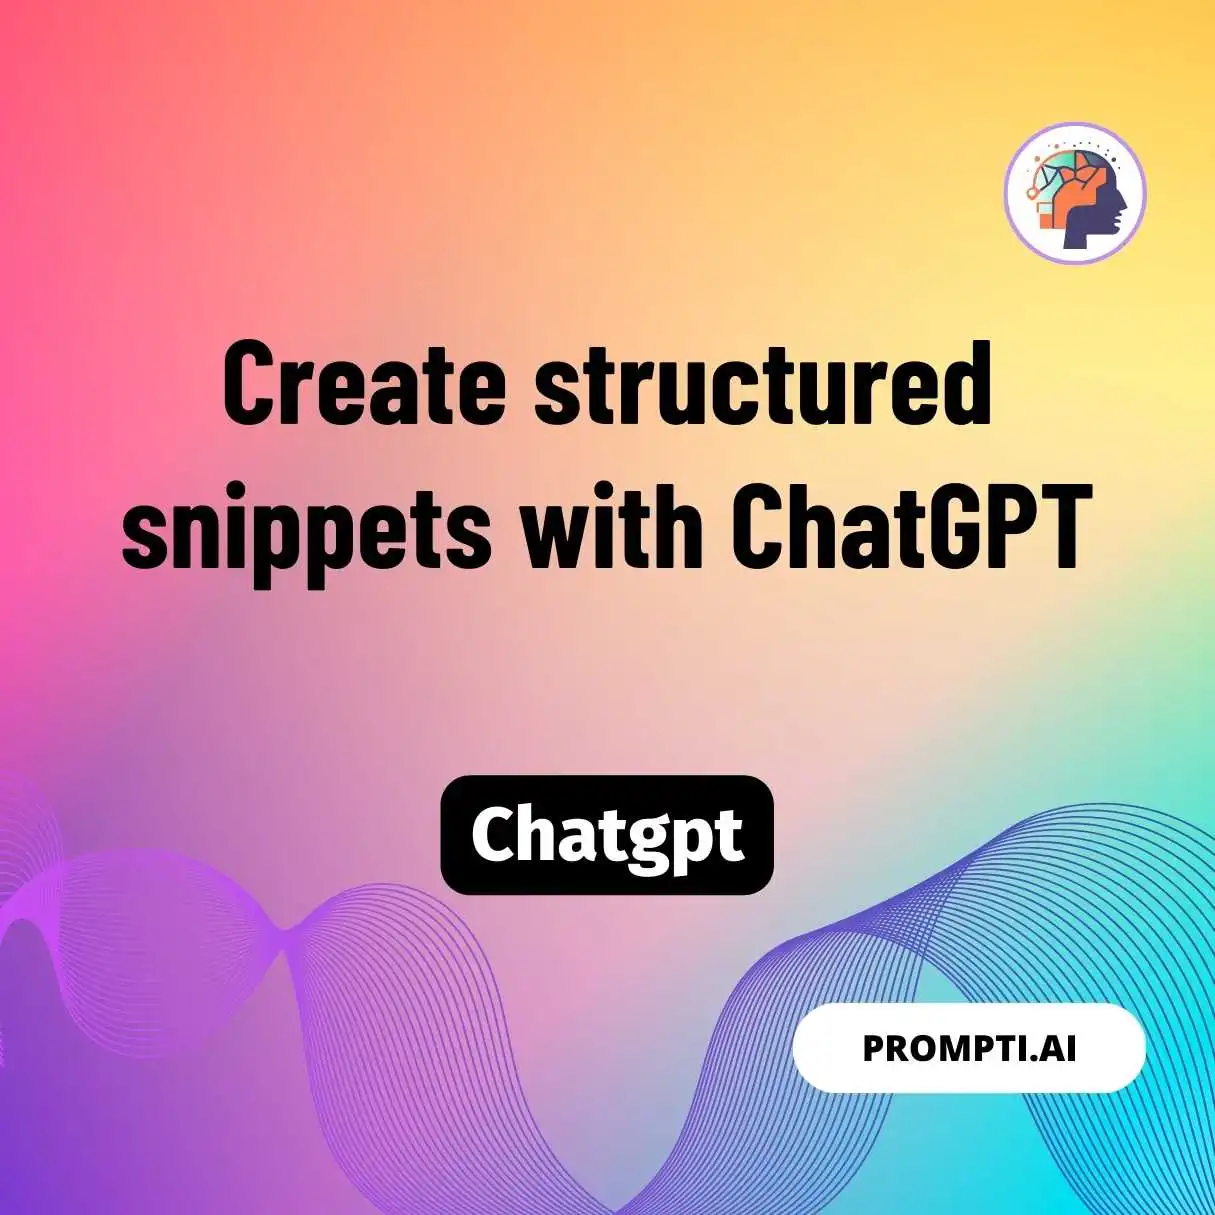 Create structured snippets with ChatGPT